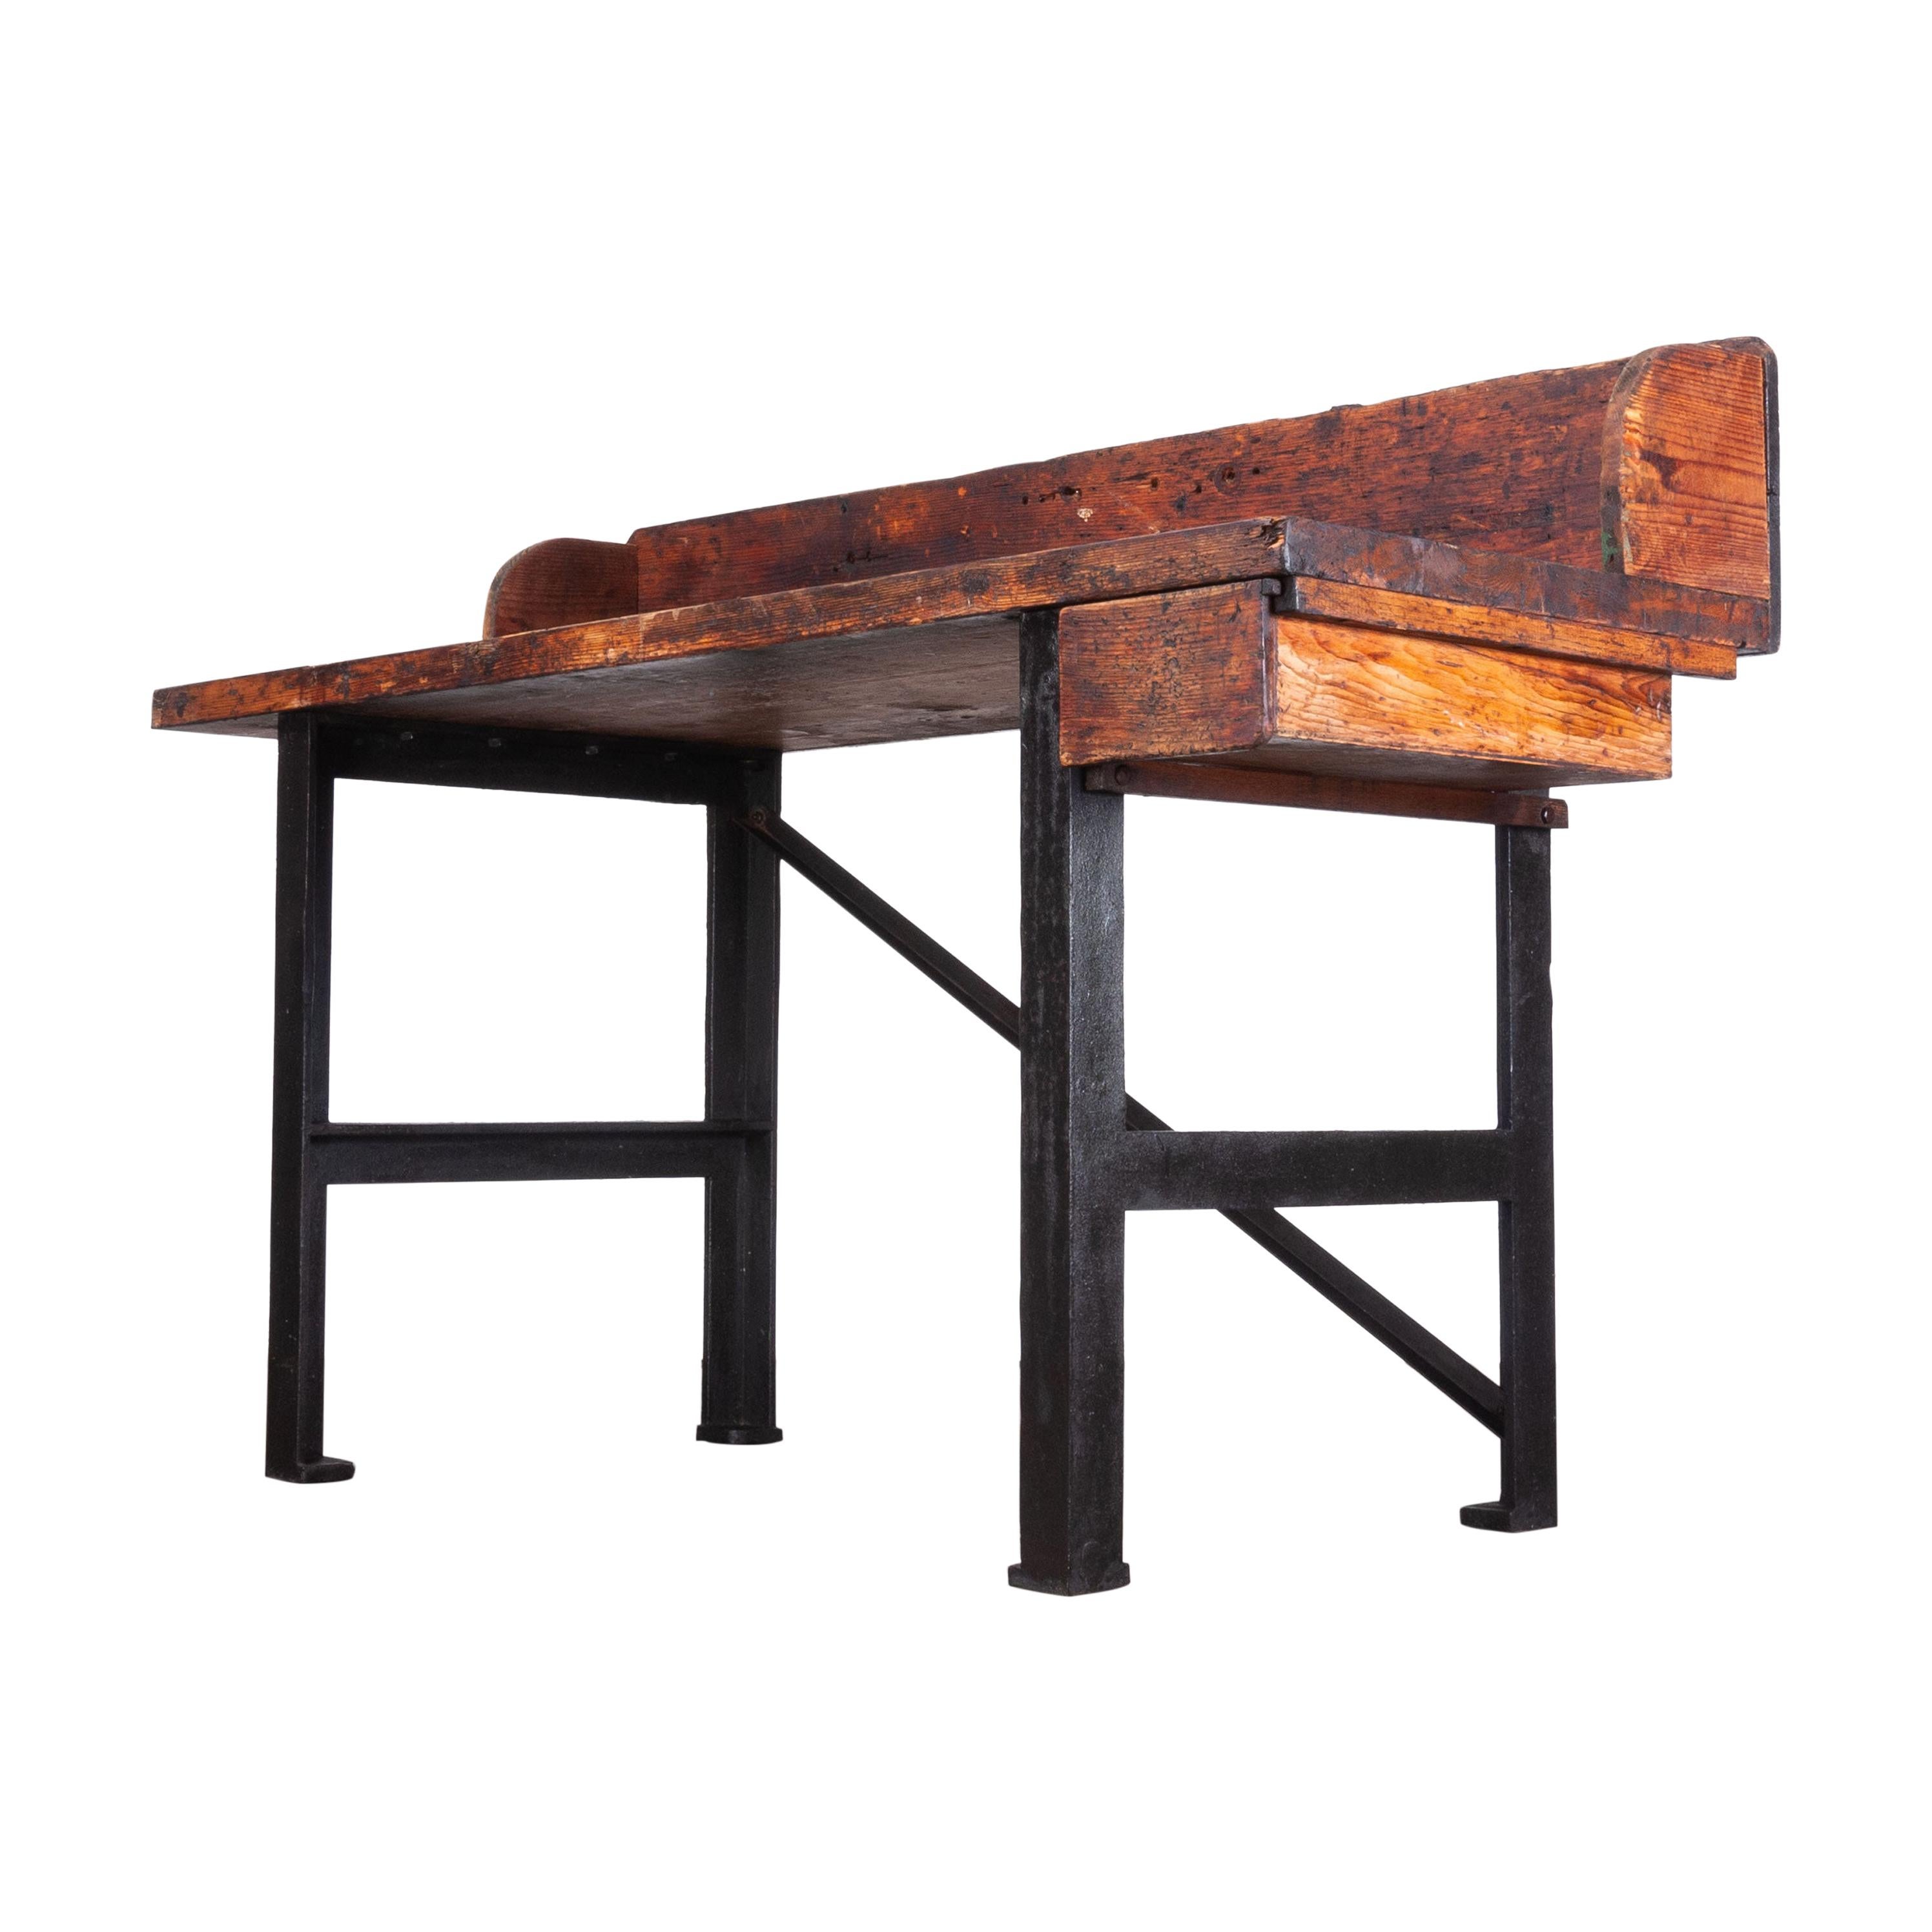 1890s Industrial Mill Work Bench/Console Table with Upstand